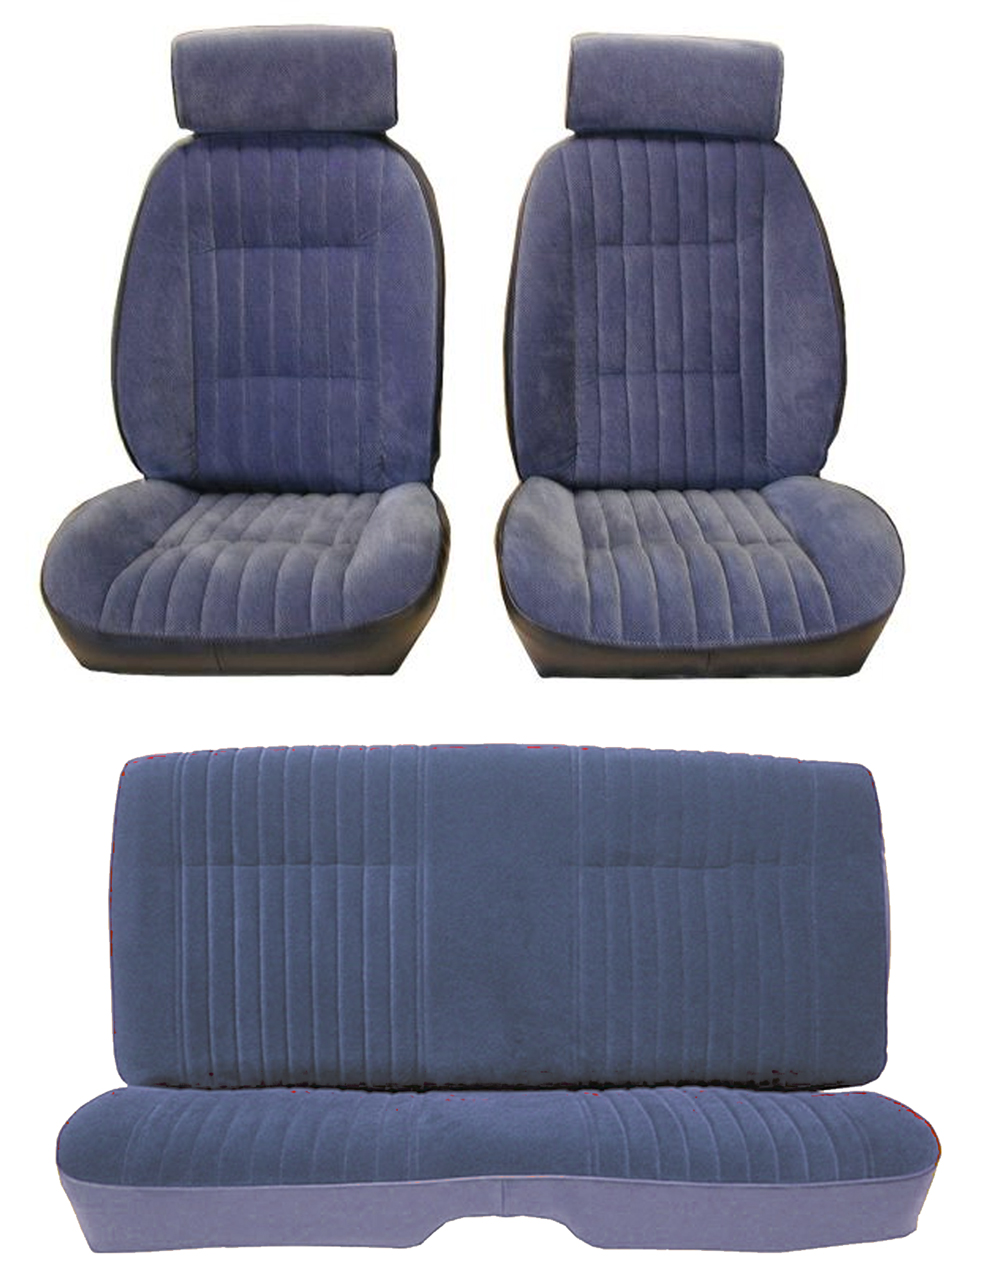 81-88 Monte Carlo SS Front Bucket and Rear Seat Covers Medium Blue Vinyl